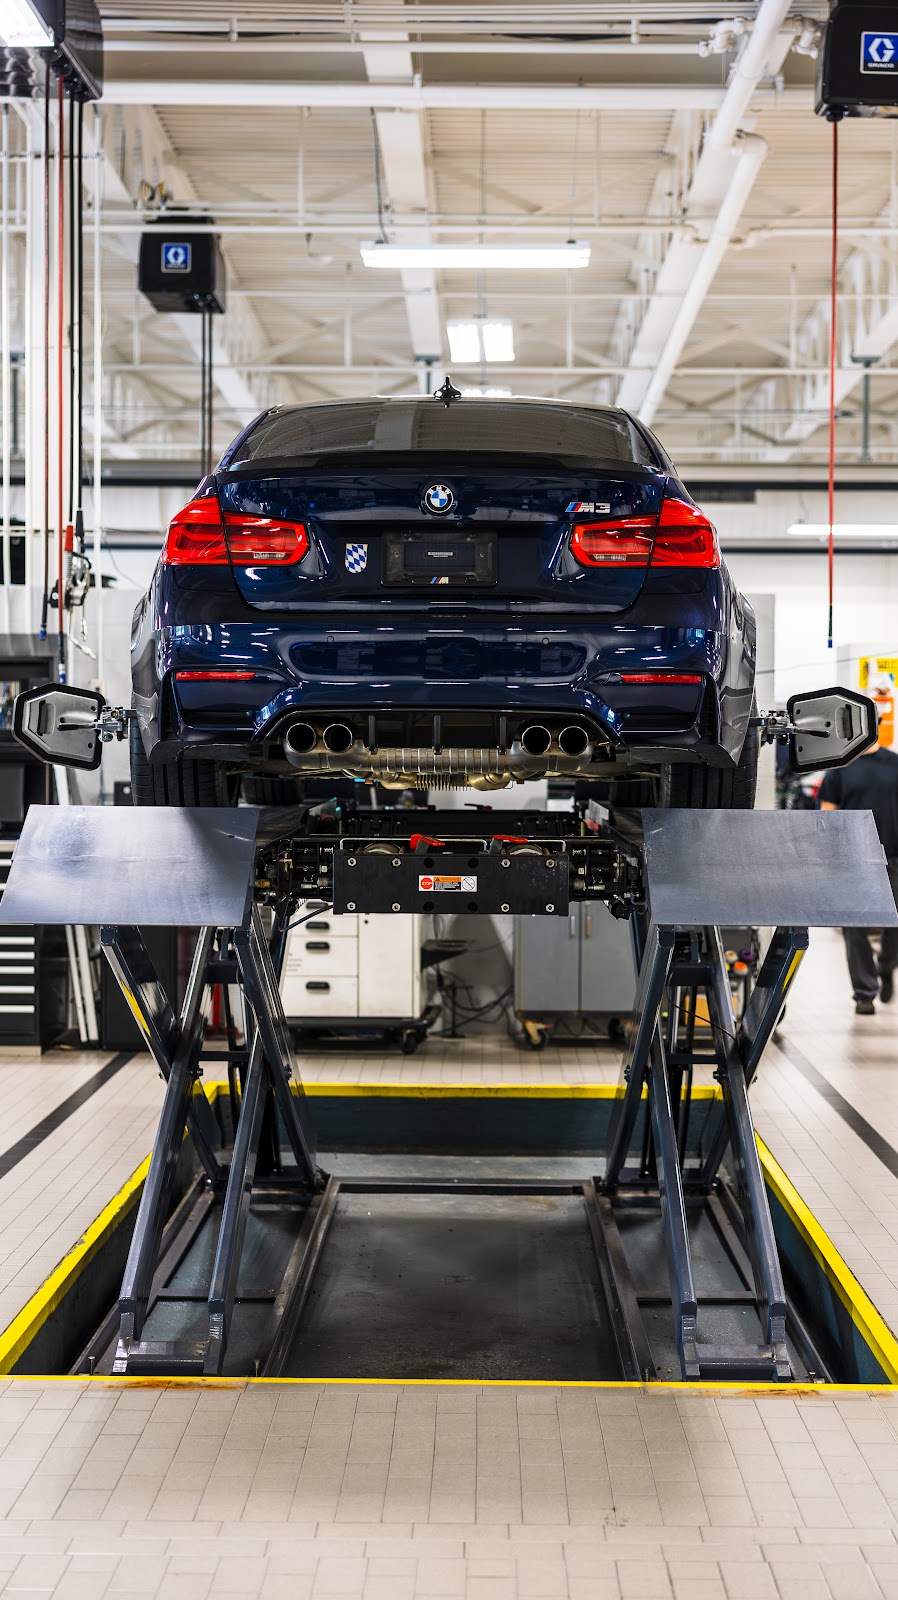 BMW of West Chester Service | 1275 Wilmington Pike, West Chester, PA 19382 | Phone: (610) 399-6802